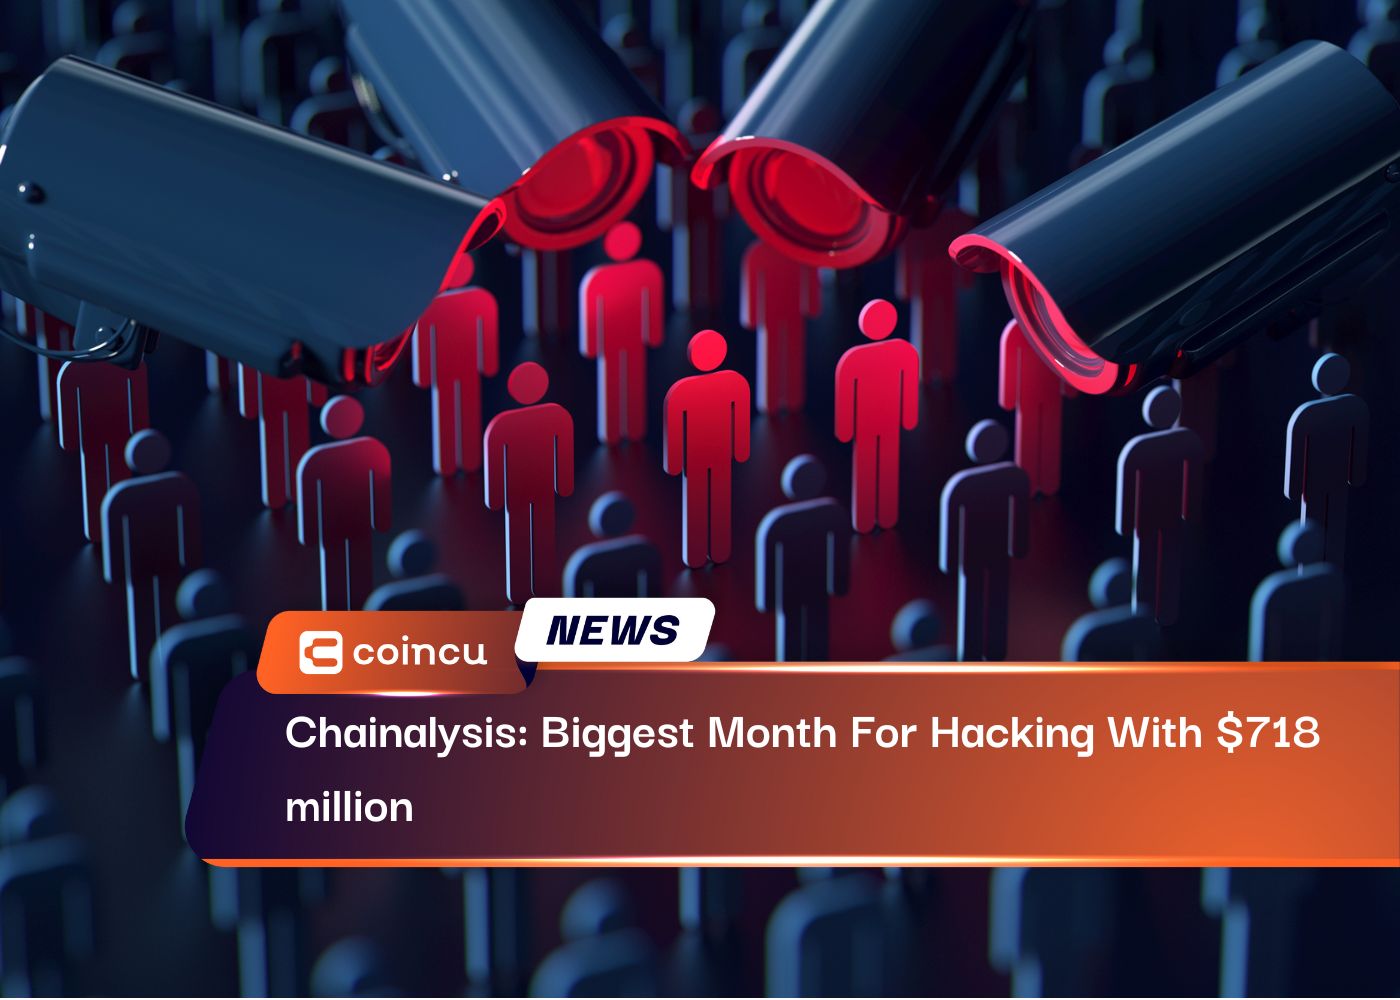 Chainalysis: Biggest Month For Hacking With $718 million